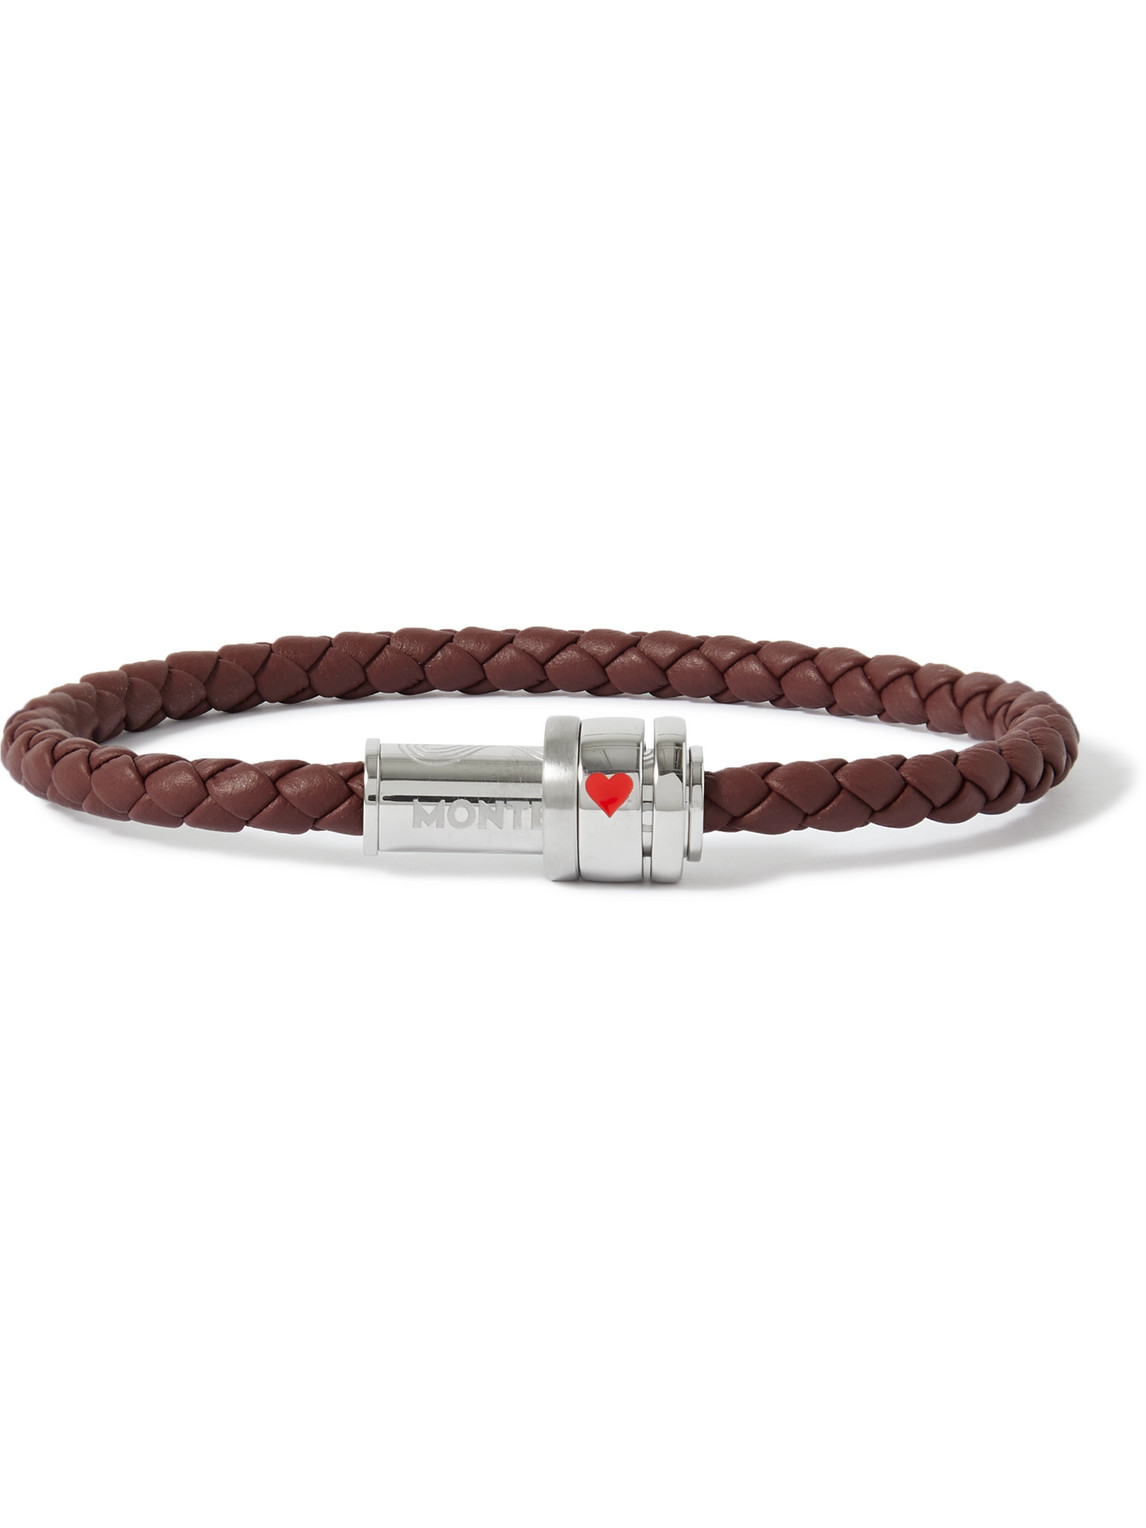 MONTBLANC MEISTERSTÜCK WOVEN LEATHER AND STAINLESS STEEL BRACELET